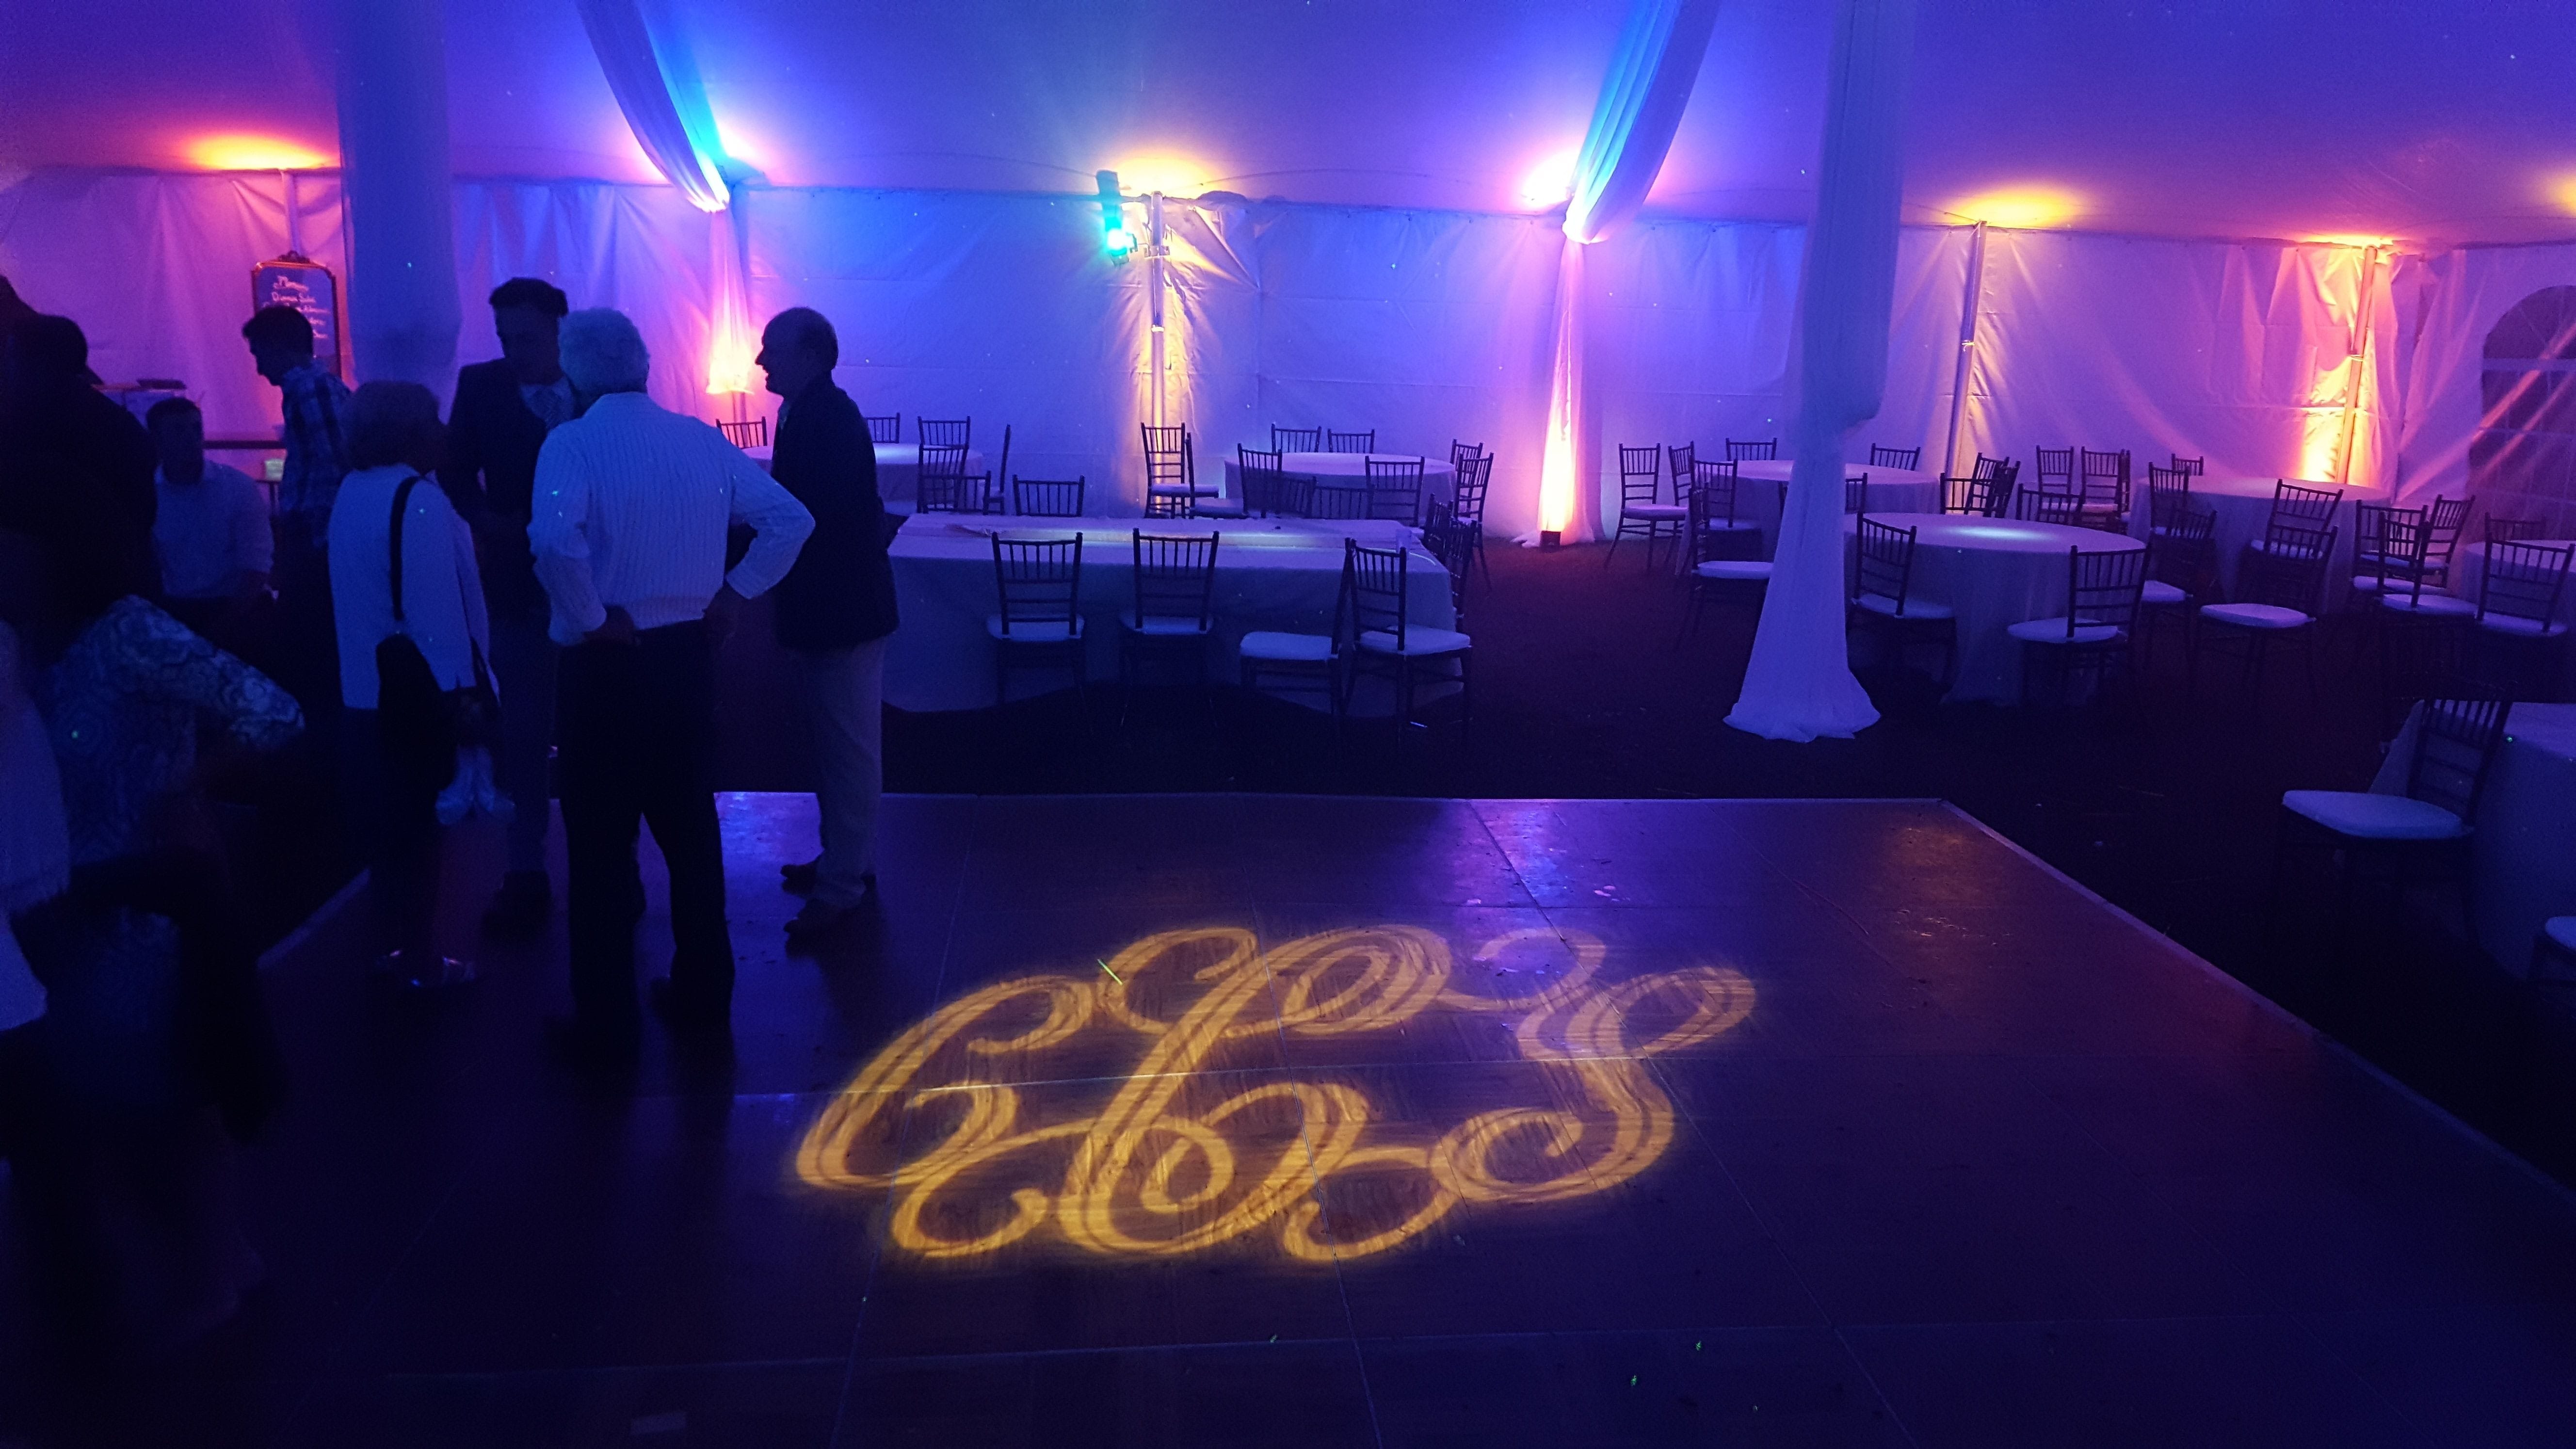 Tent wedding lighting. Up lighting in blue and orange. Stars and Northern Lights on the ceiling. Pin spots on flowers. Decor by @thevaultduluth